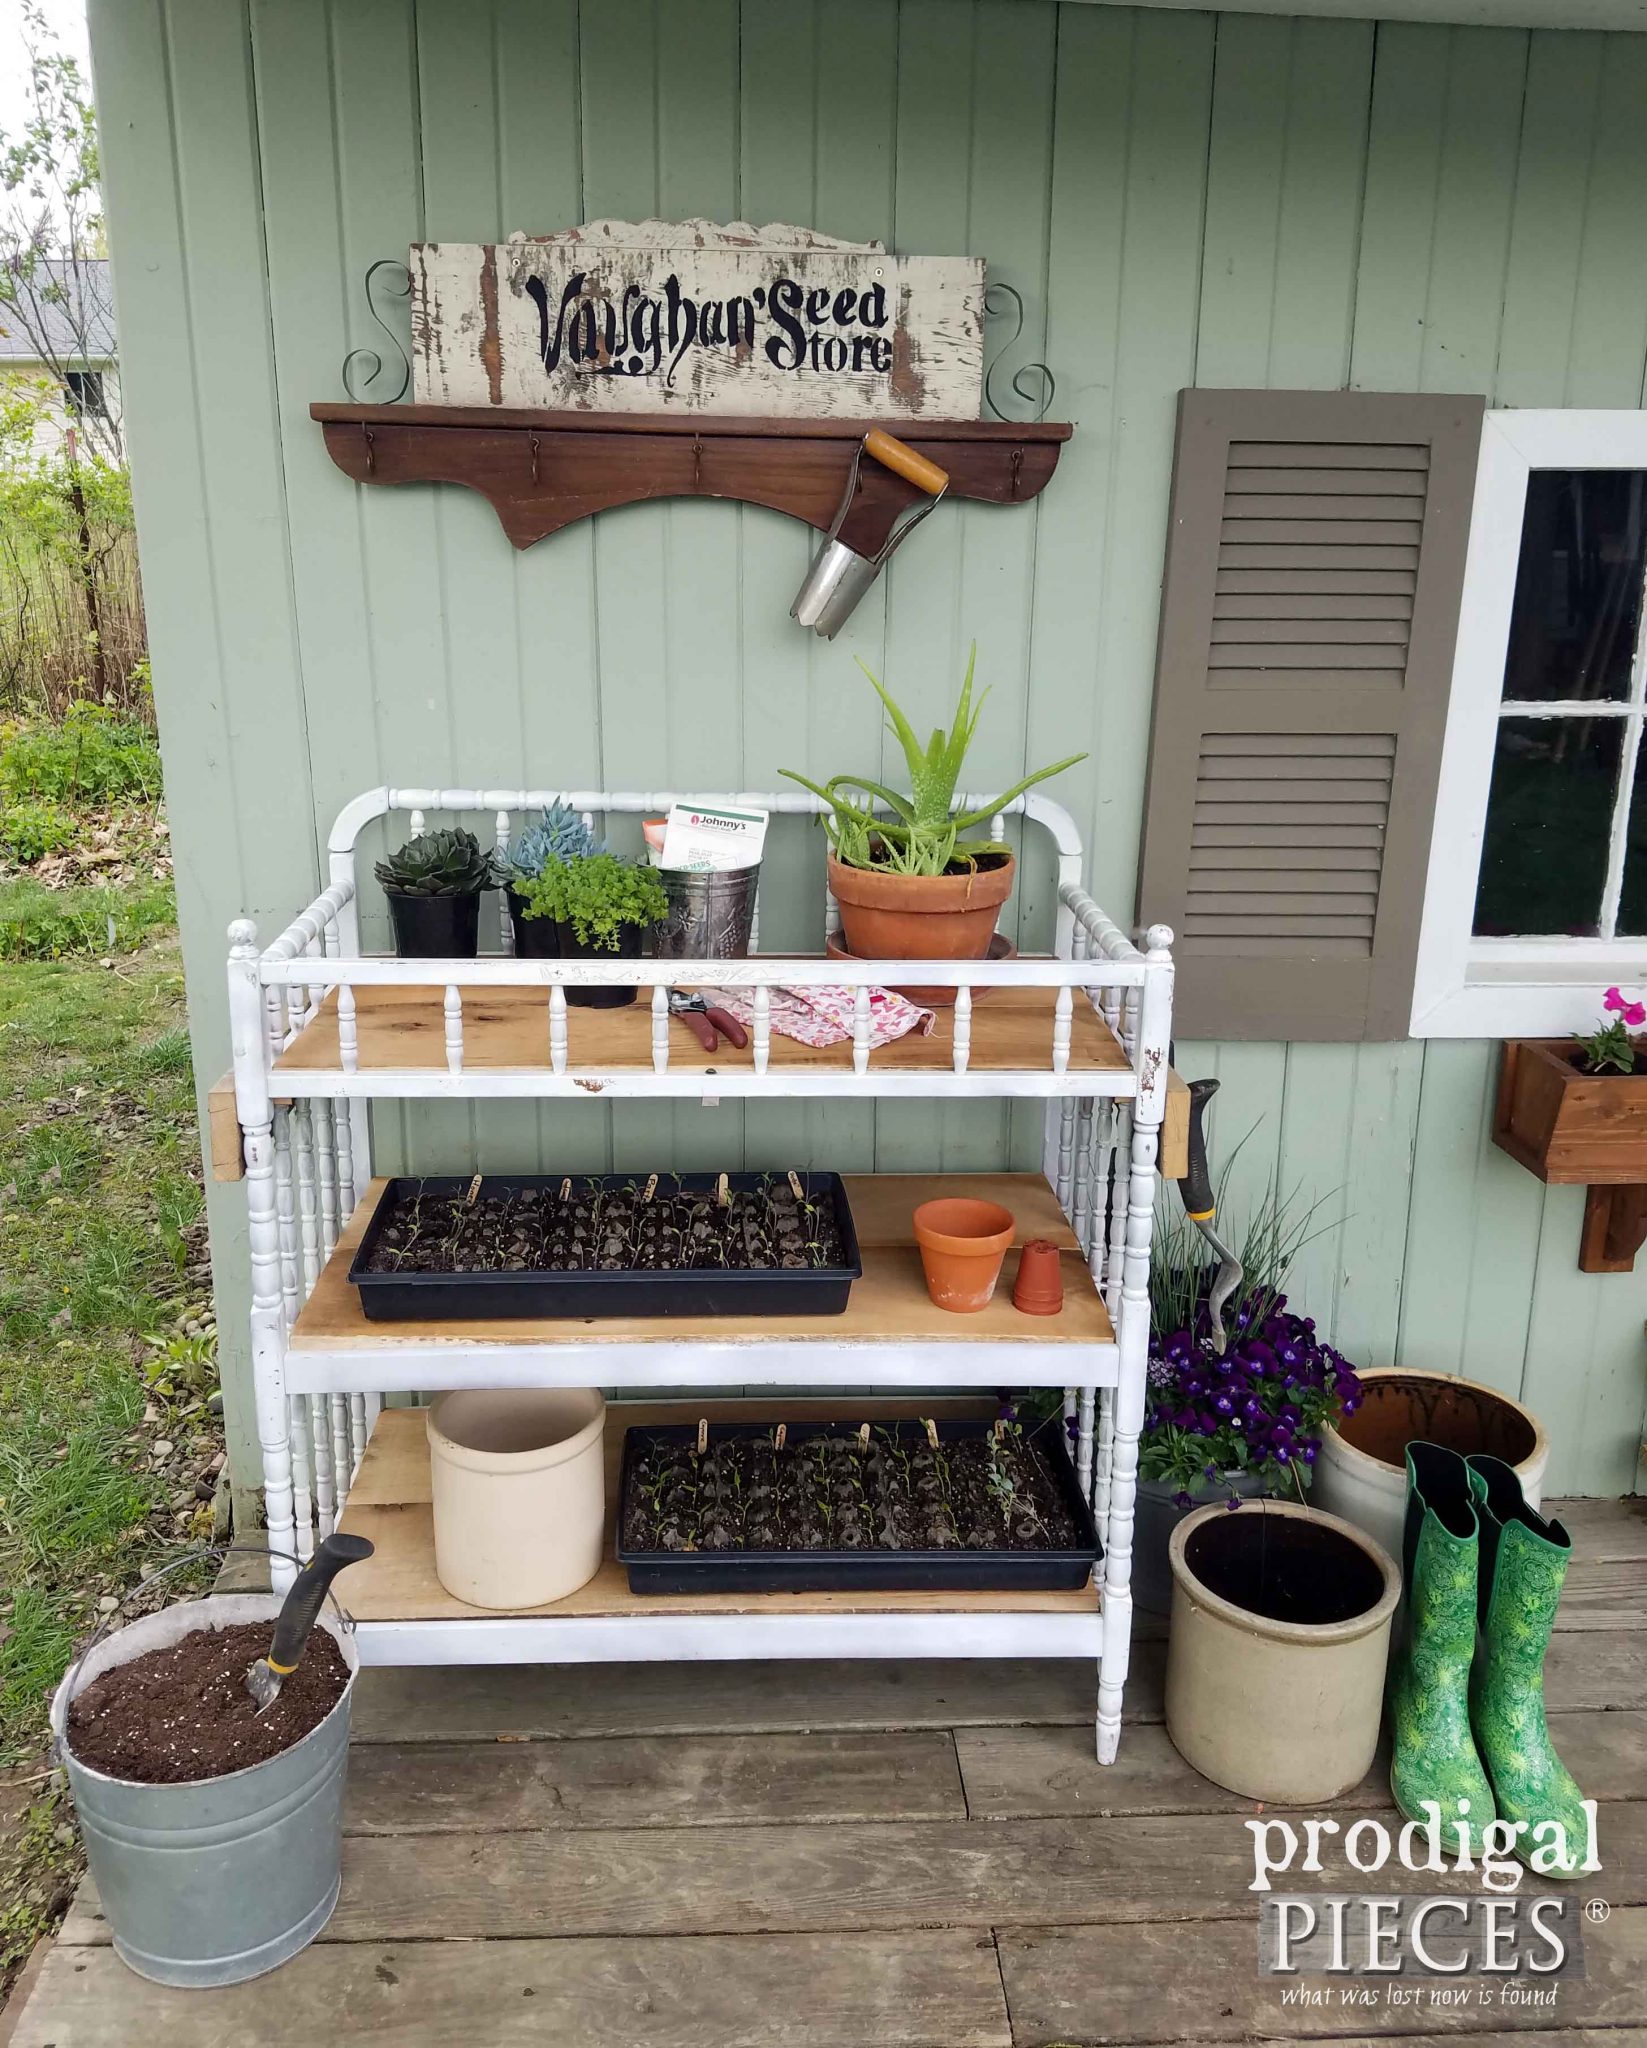 Upcycled Changing Table into Potting Bench by Prodigal Pieces | prodigalpieces.com